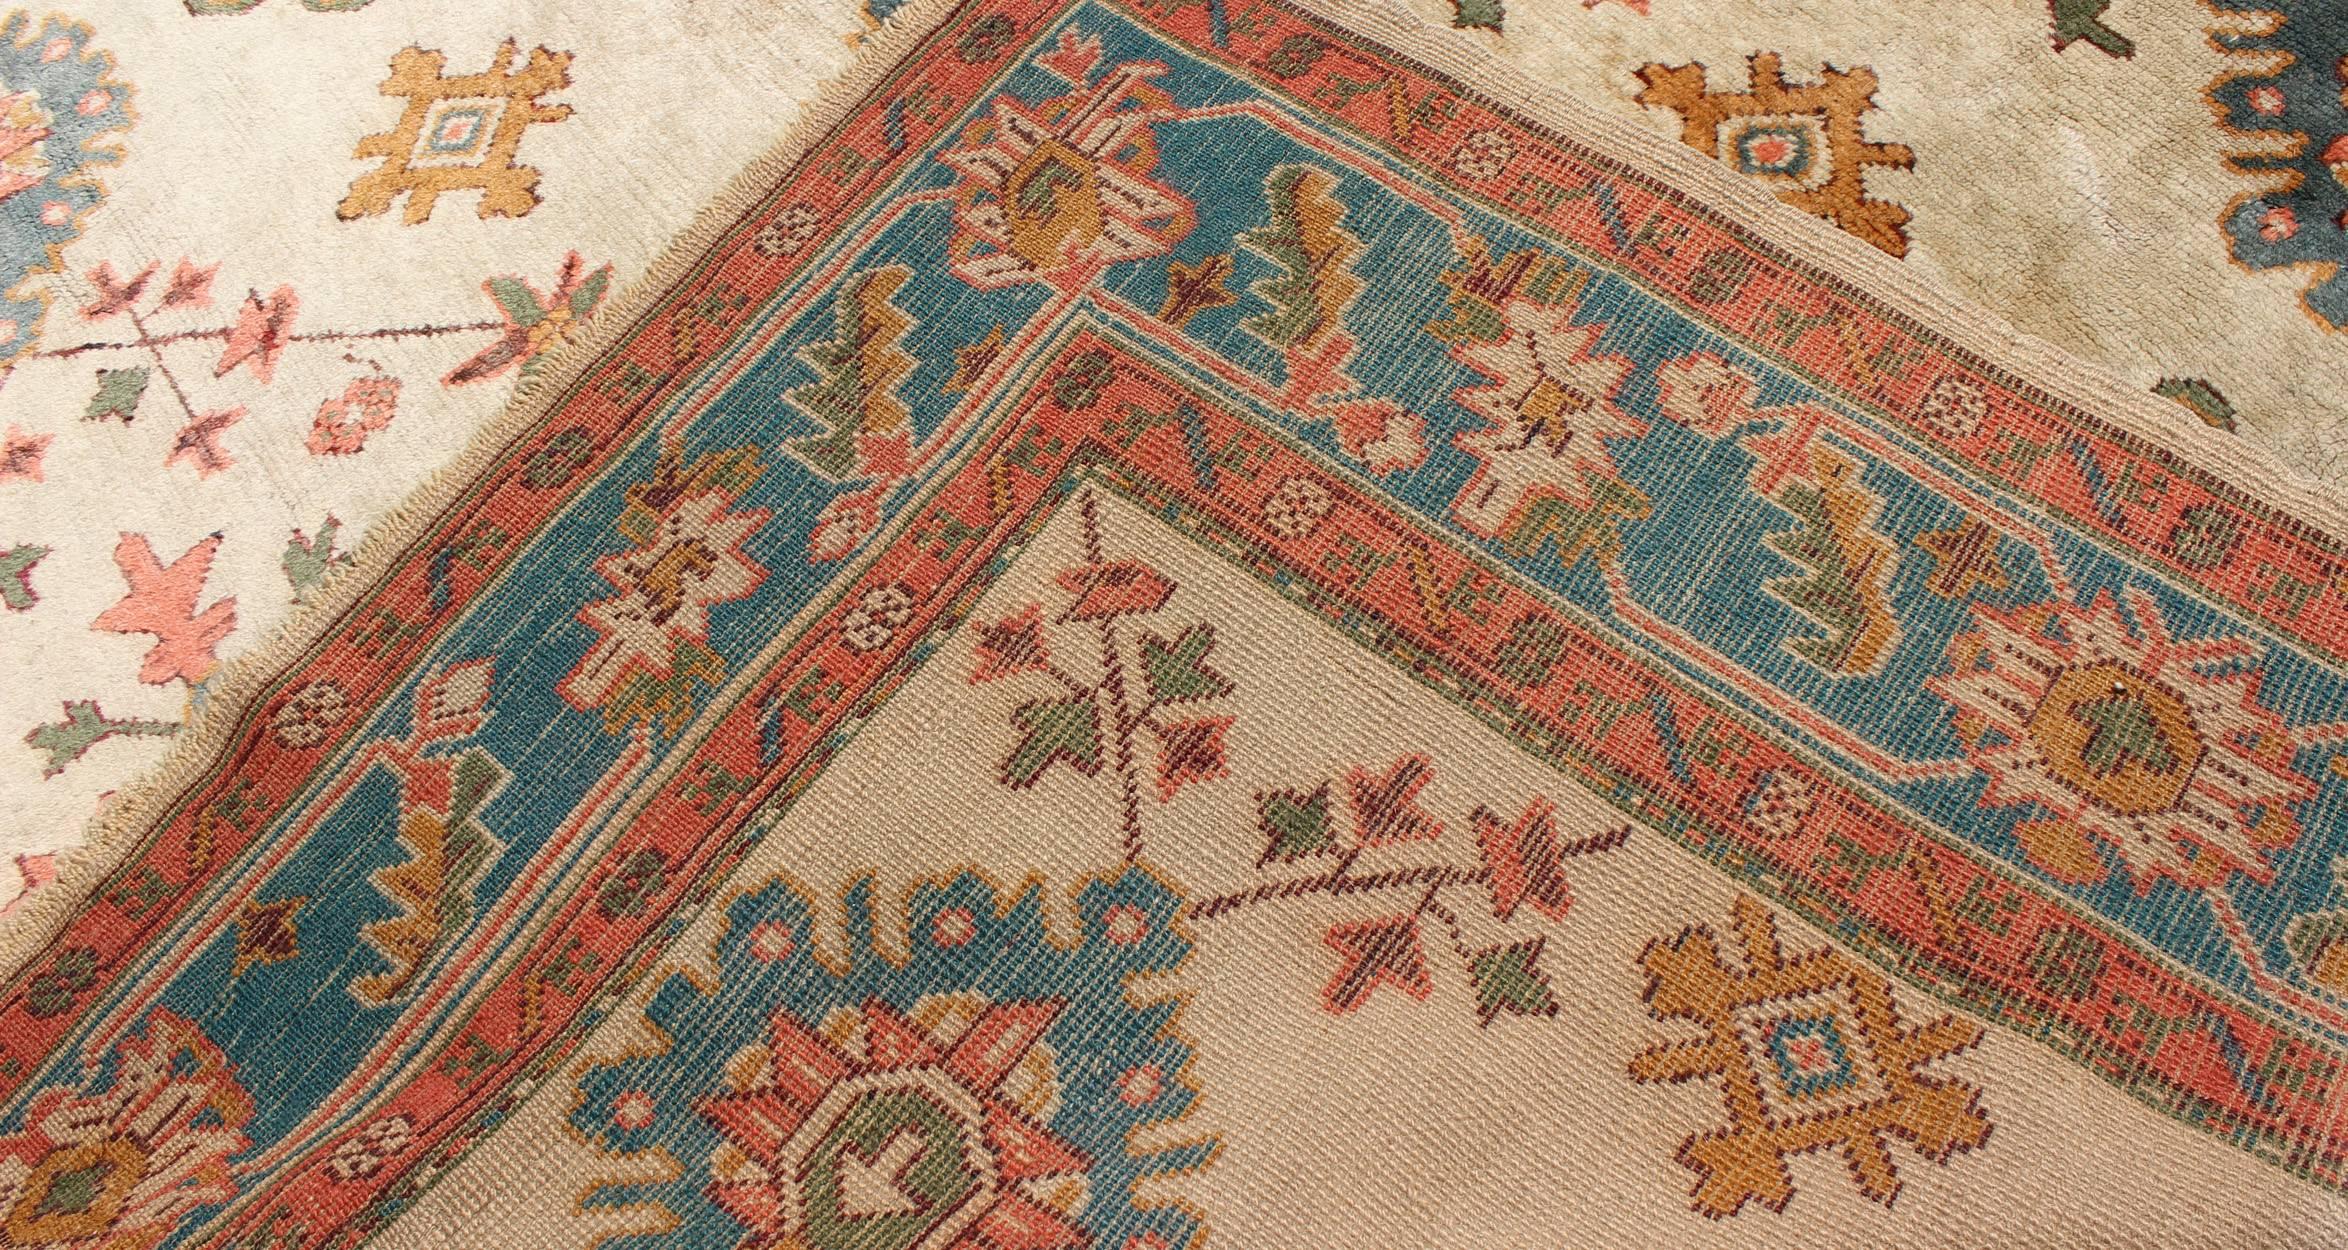 Antique Turkish Oushak Rug With All Over Design in Teal, Cream & Coral 1